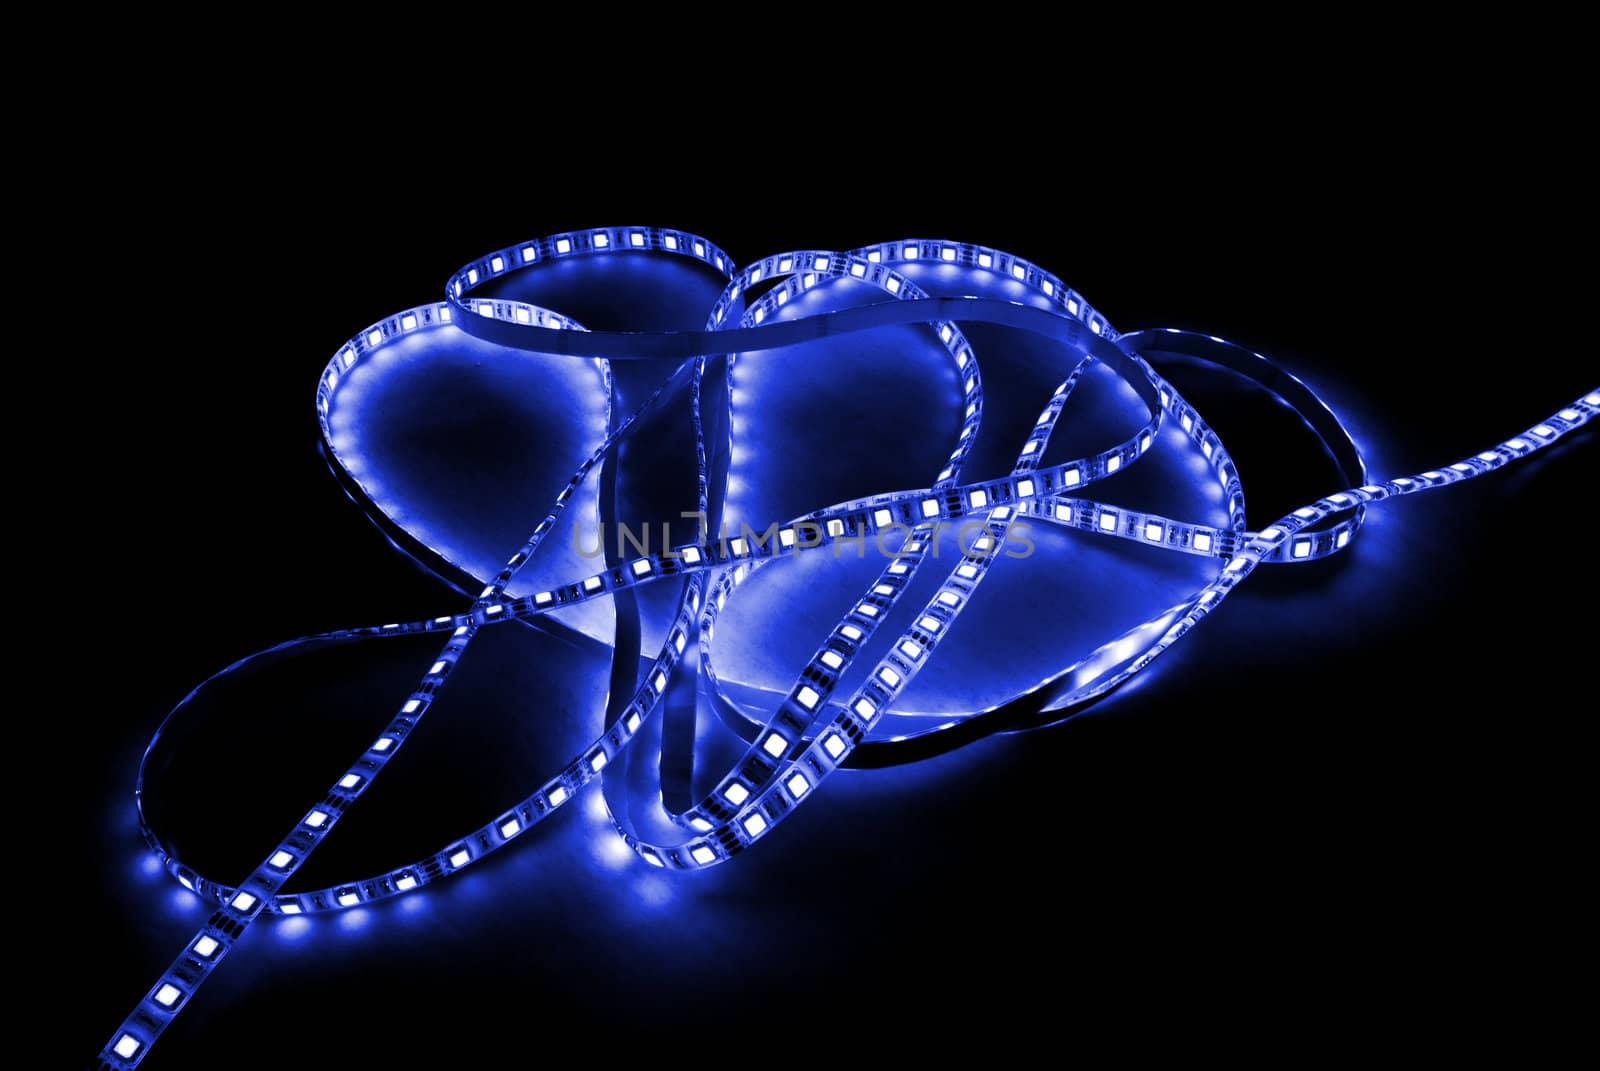 blue led strip with a glue layer, background in the dark, illuminated by strip